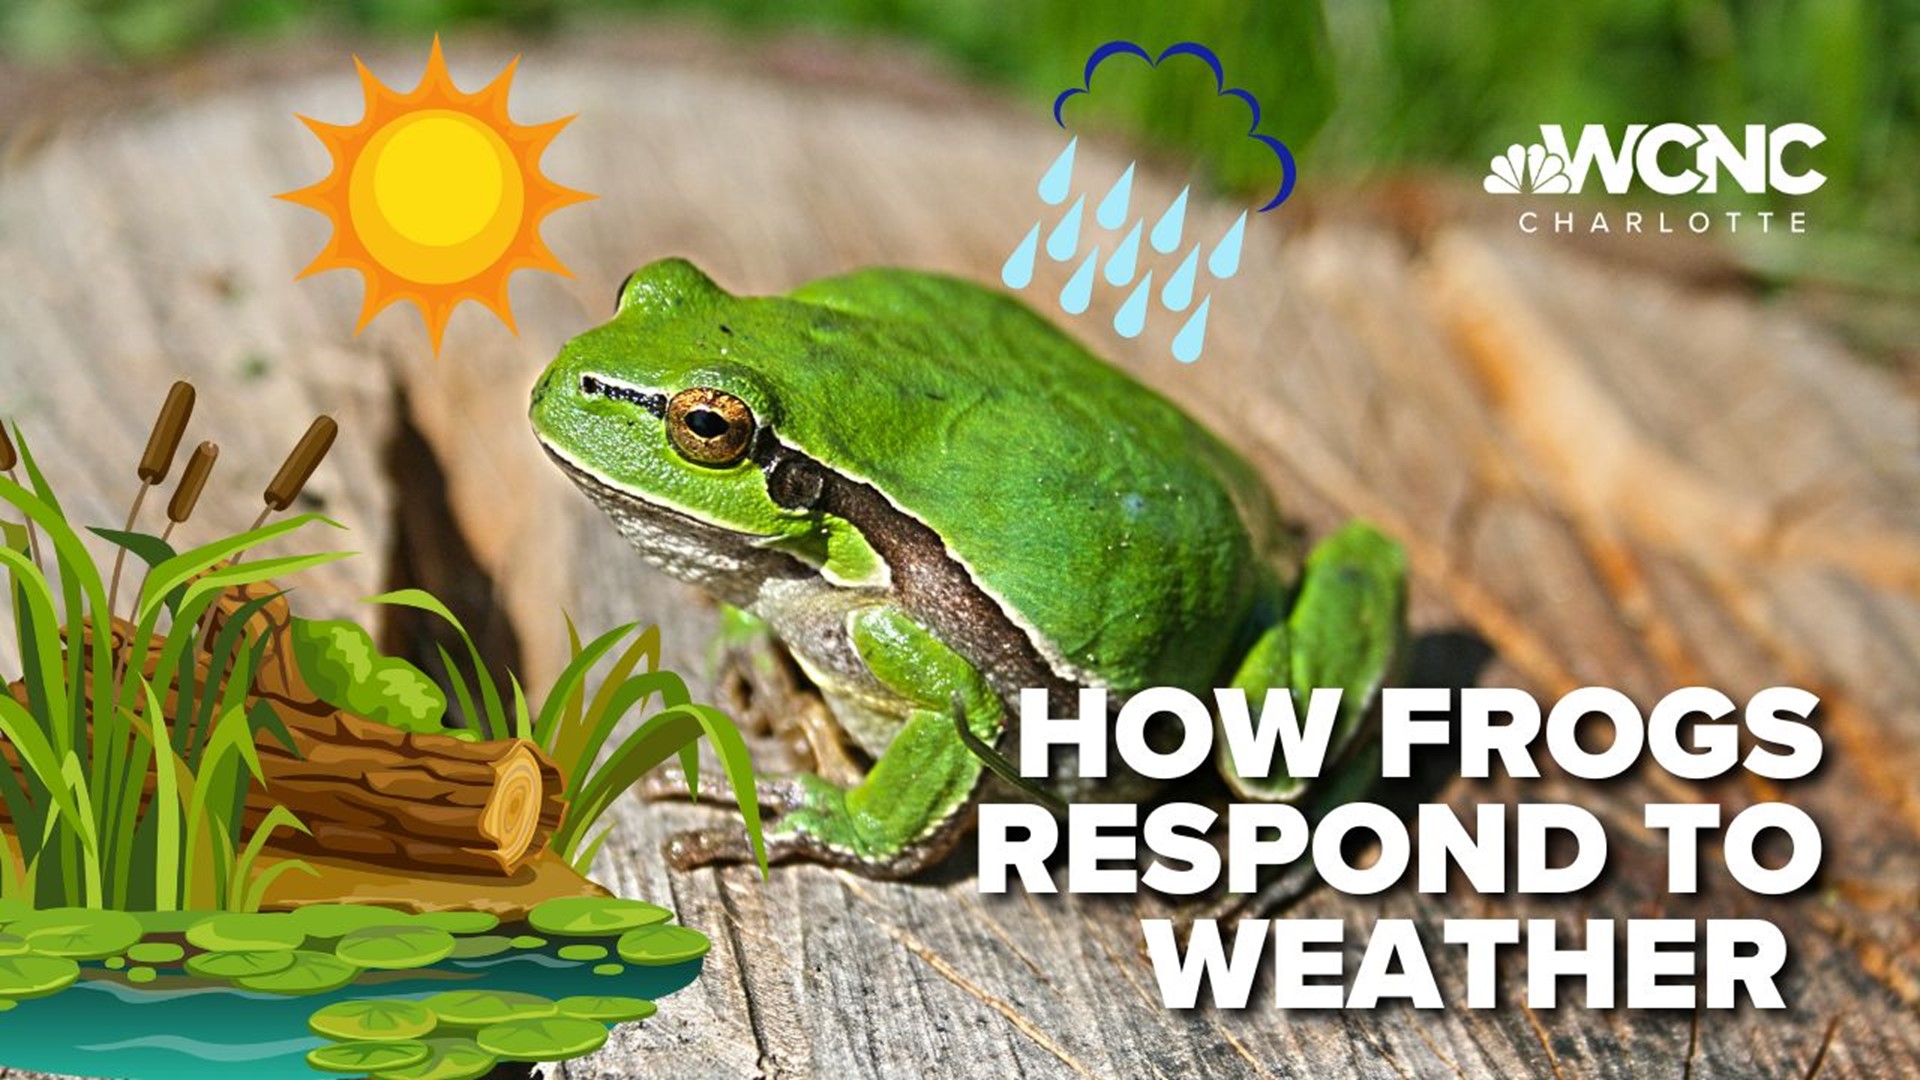 As temperatures warm up, expect to see more frogs leaping around. A closer look shows how under the right conditions, they can help with mosquitos near your home.